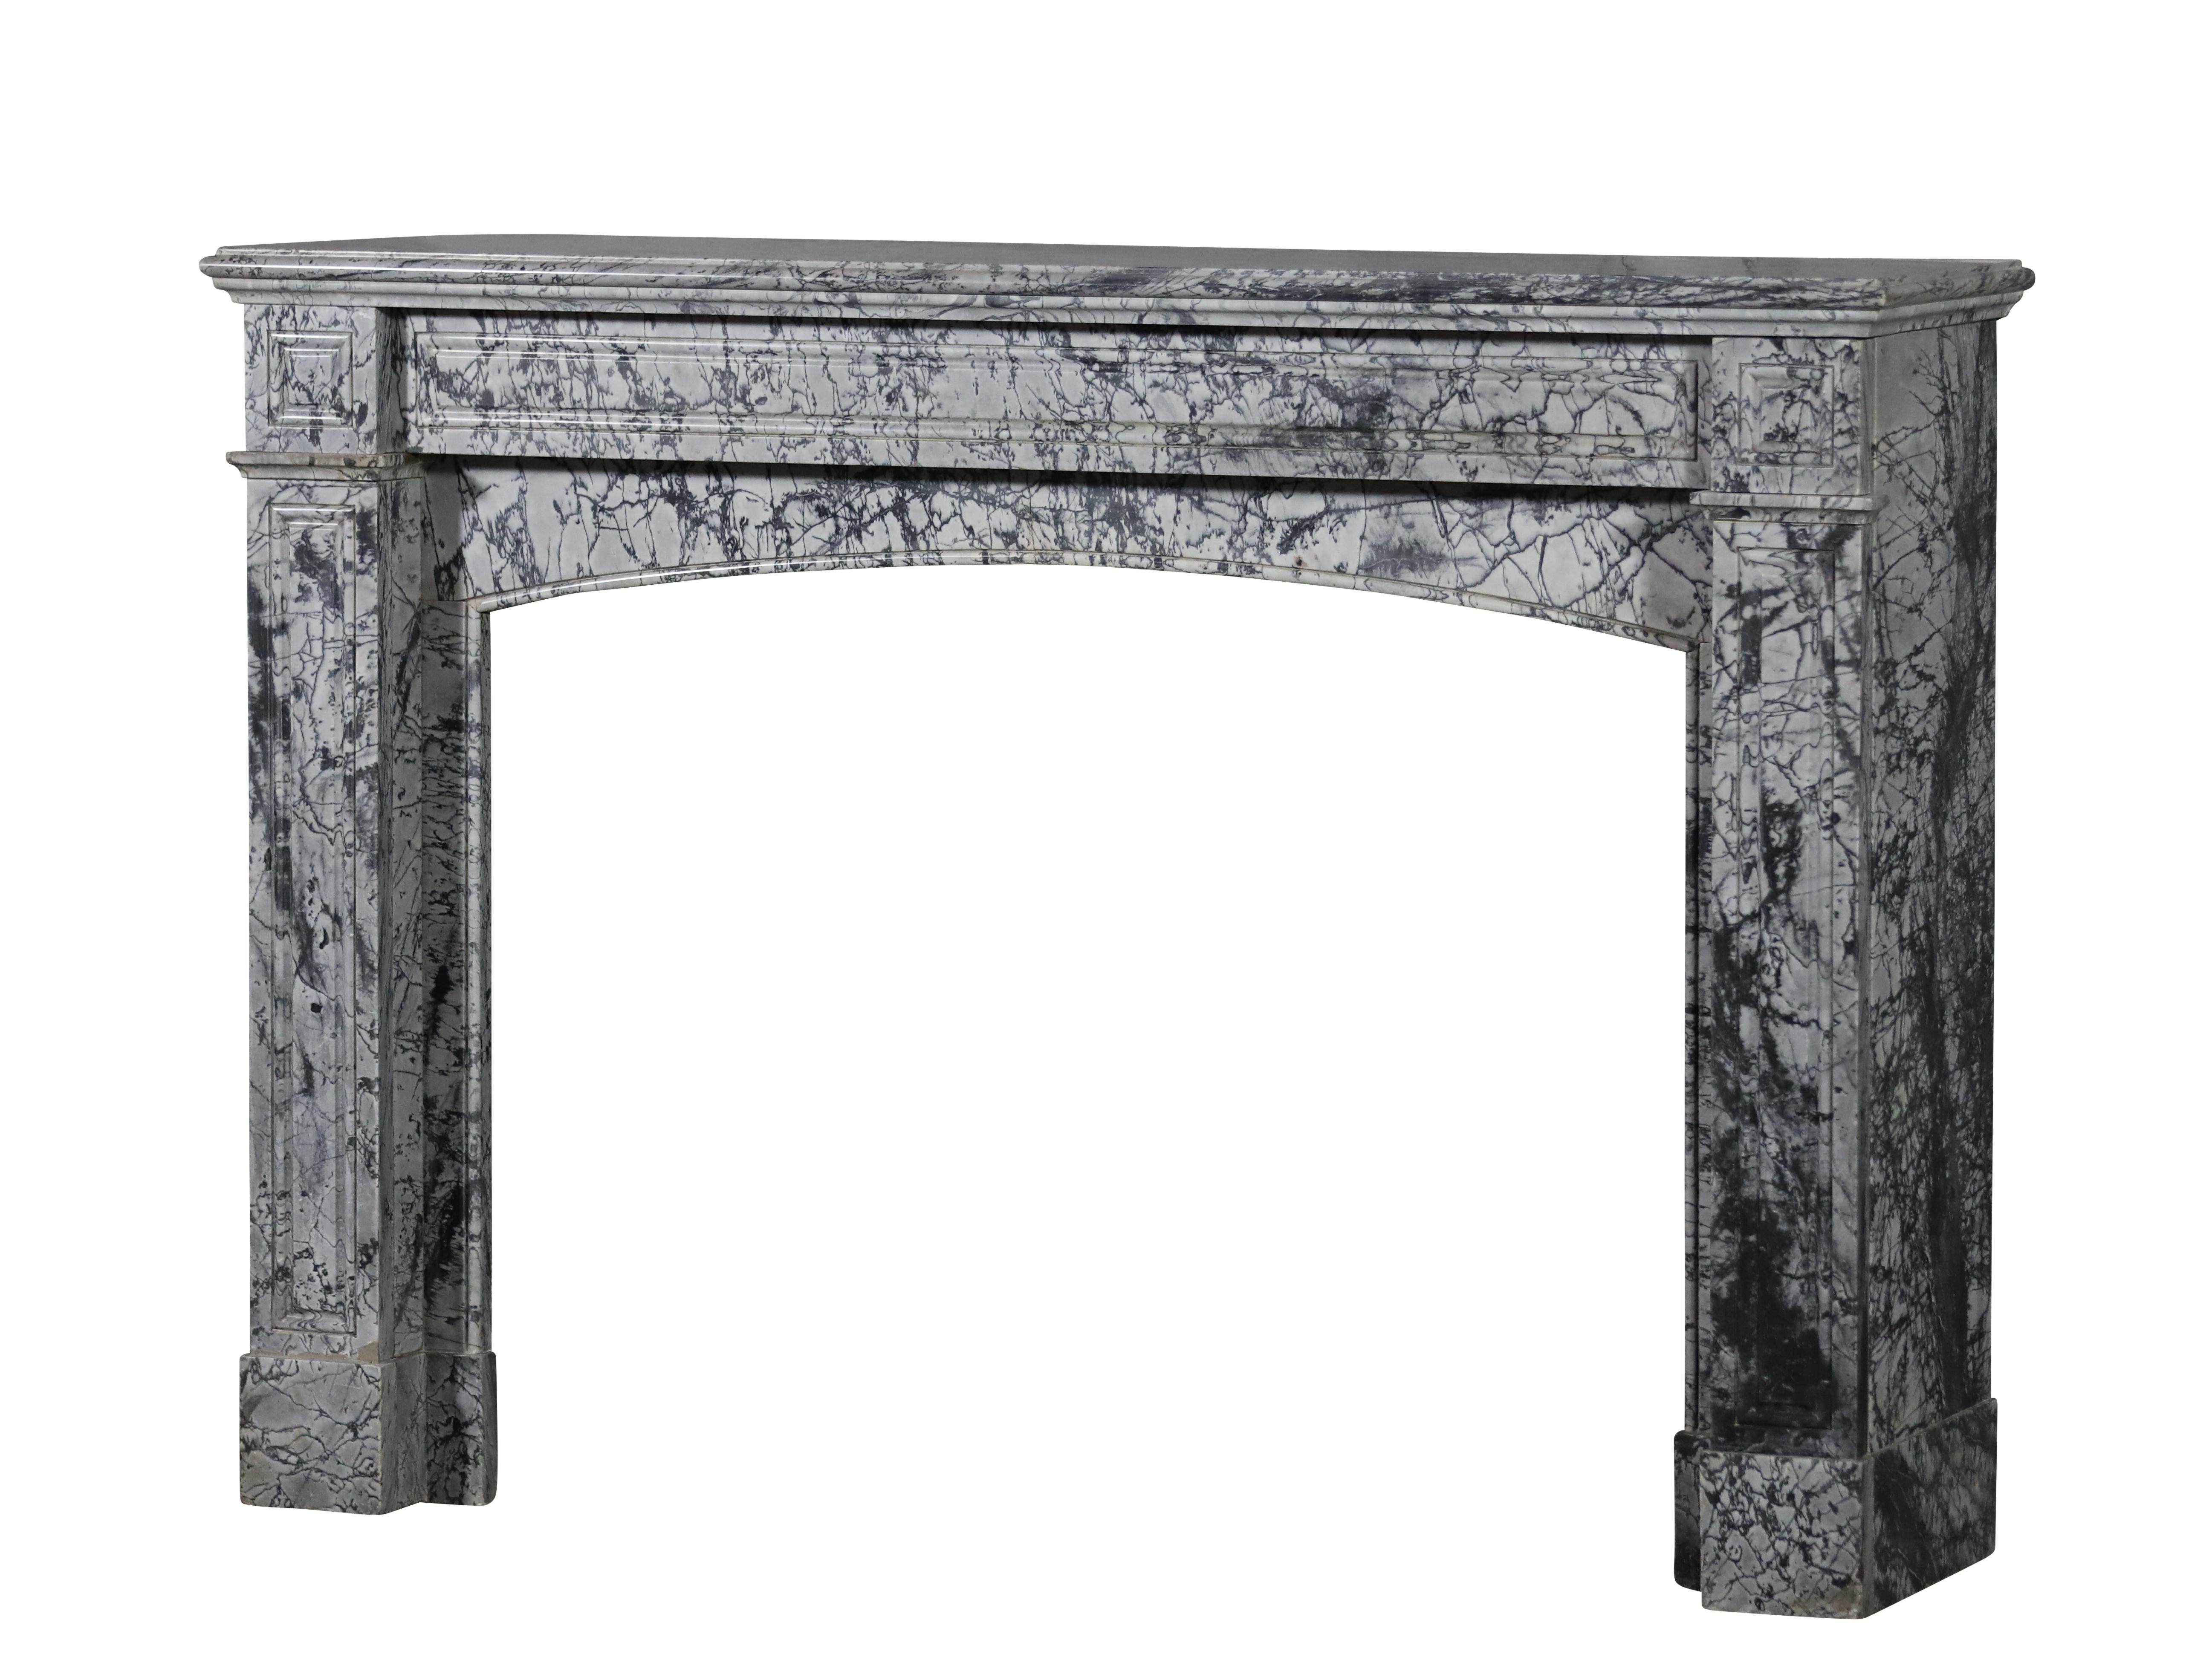 Bleu Turquin Marble Fireplace Surround In Great Condition For Timeless Design For Sale 7